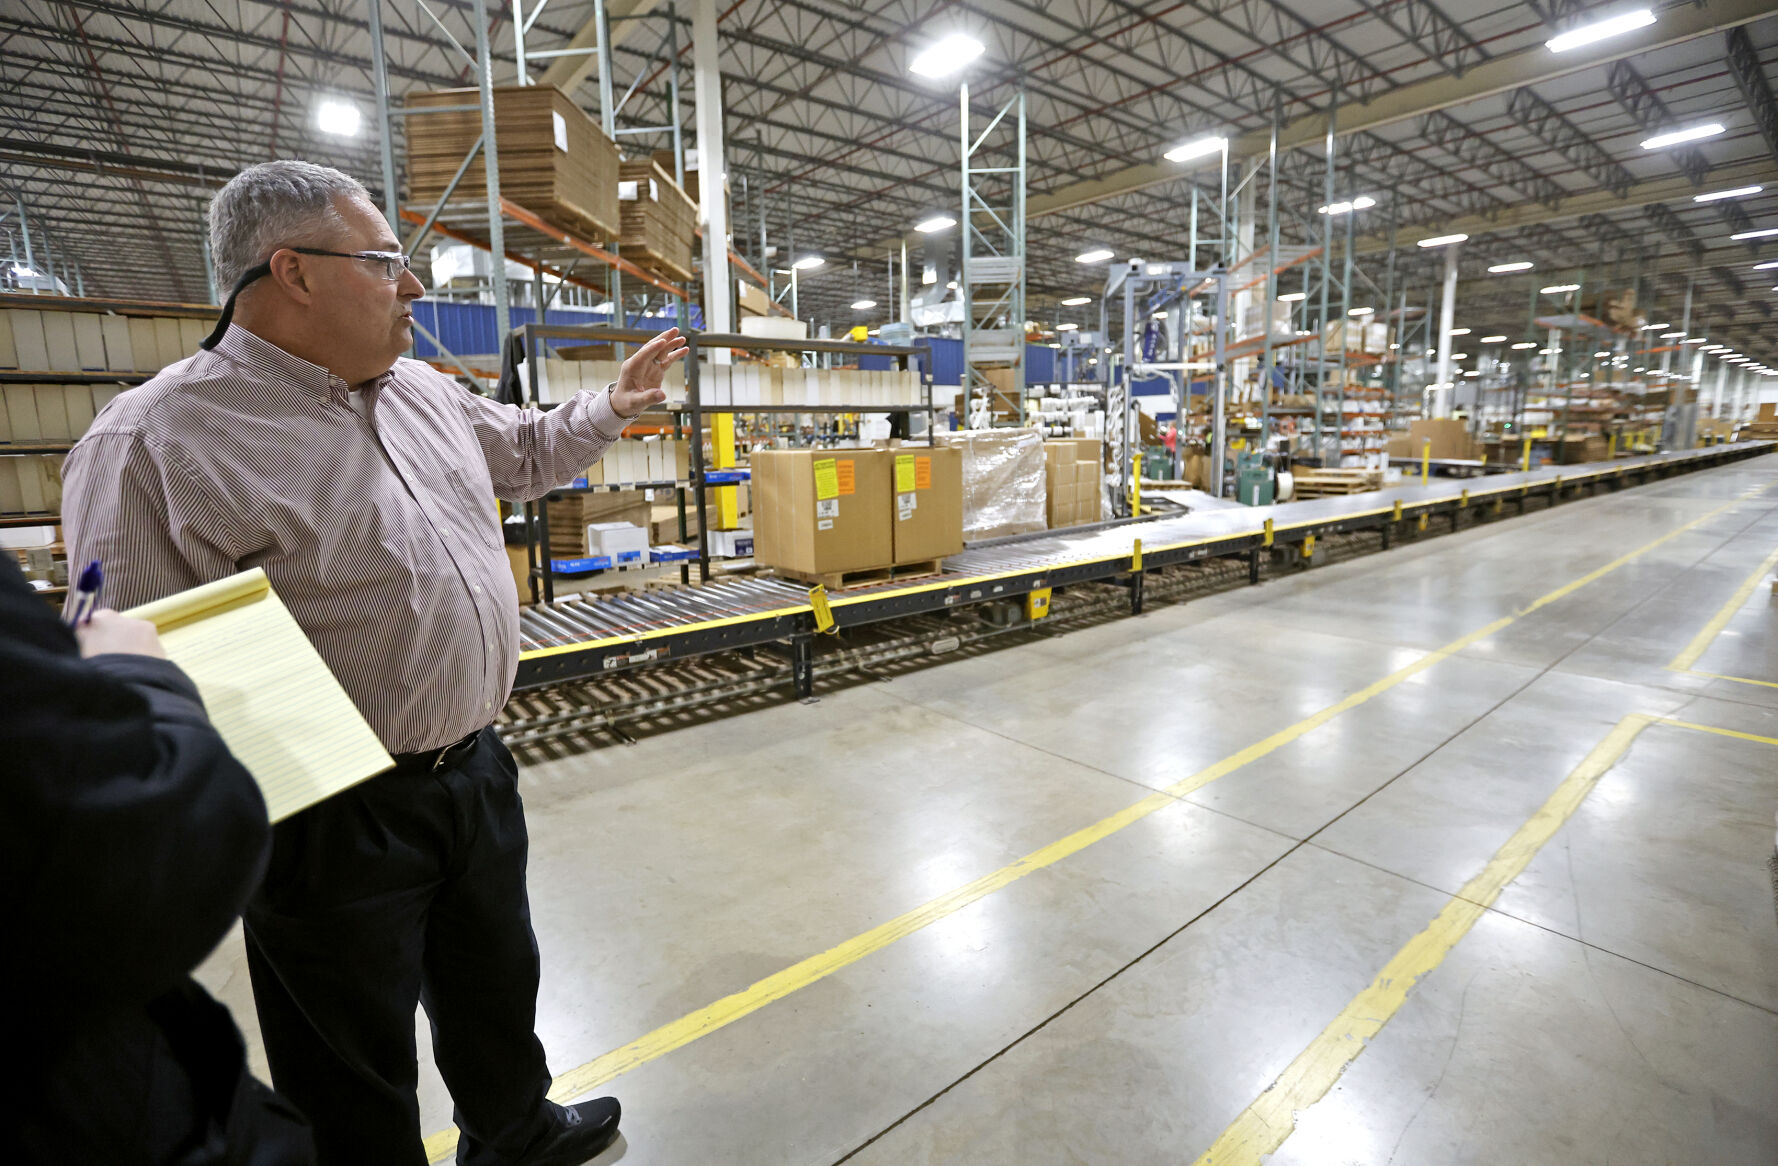 Sam Humphrey, president at Mi-T-M Corp., gives a tour at the facility in Peosta, Iowa.    PHOTO CREDIT: JESSICA REILLY
Telegraph Herald